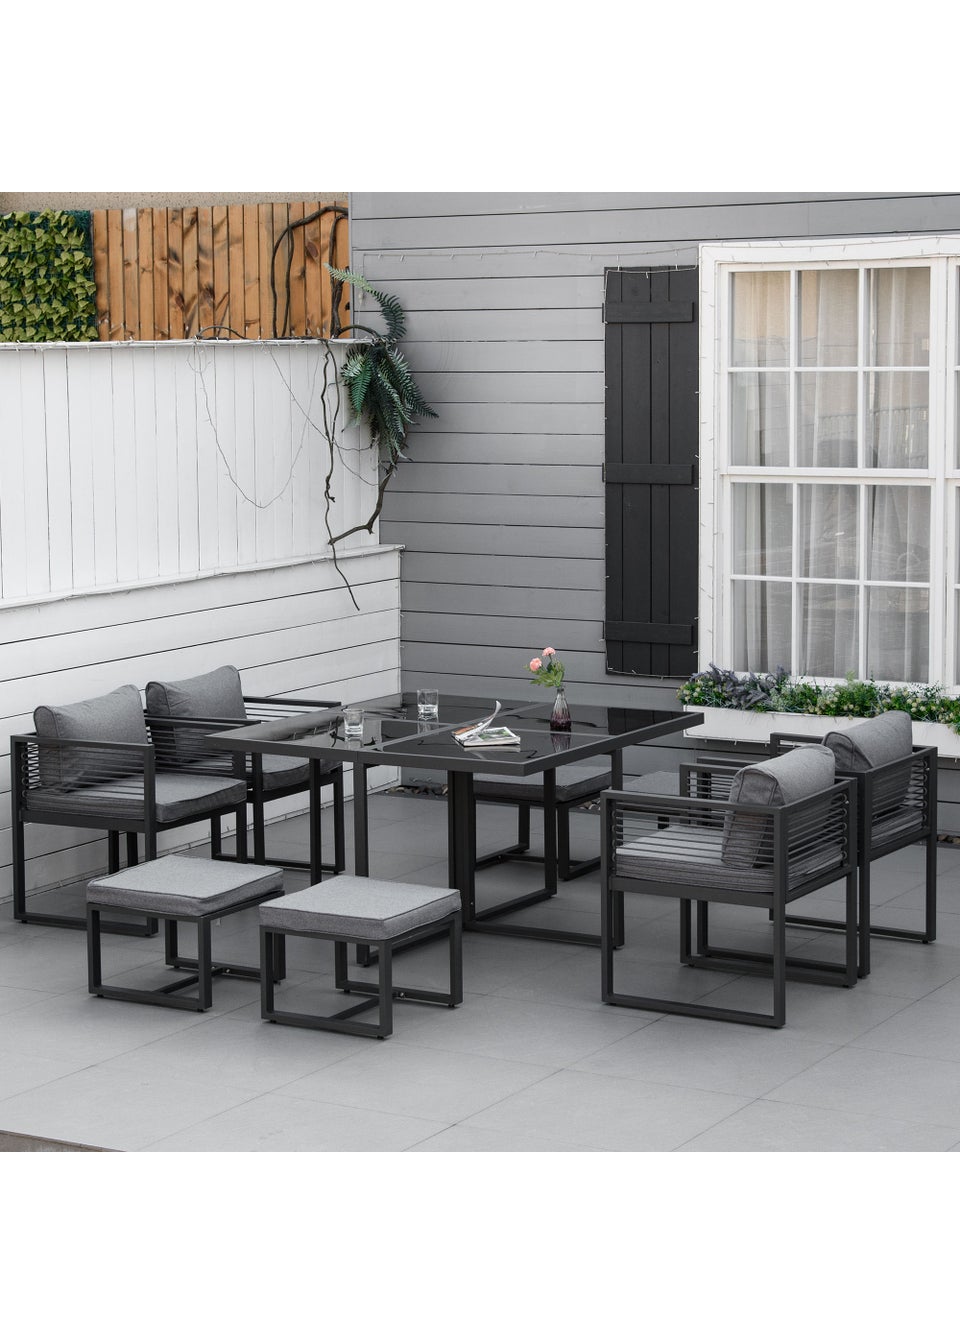 Outsunny 8 Seater Cube Dining Set